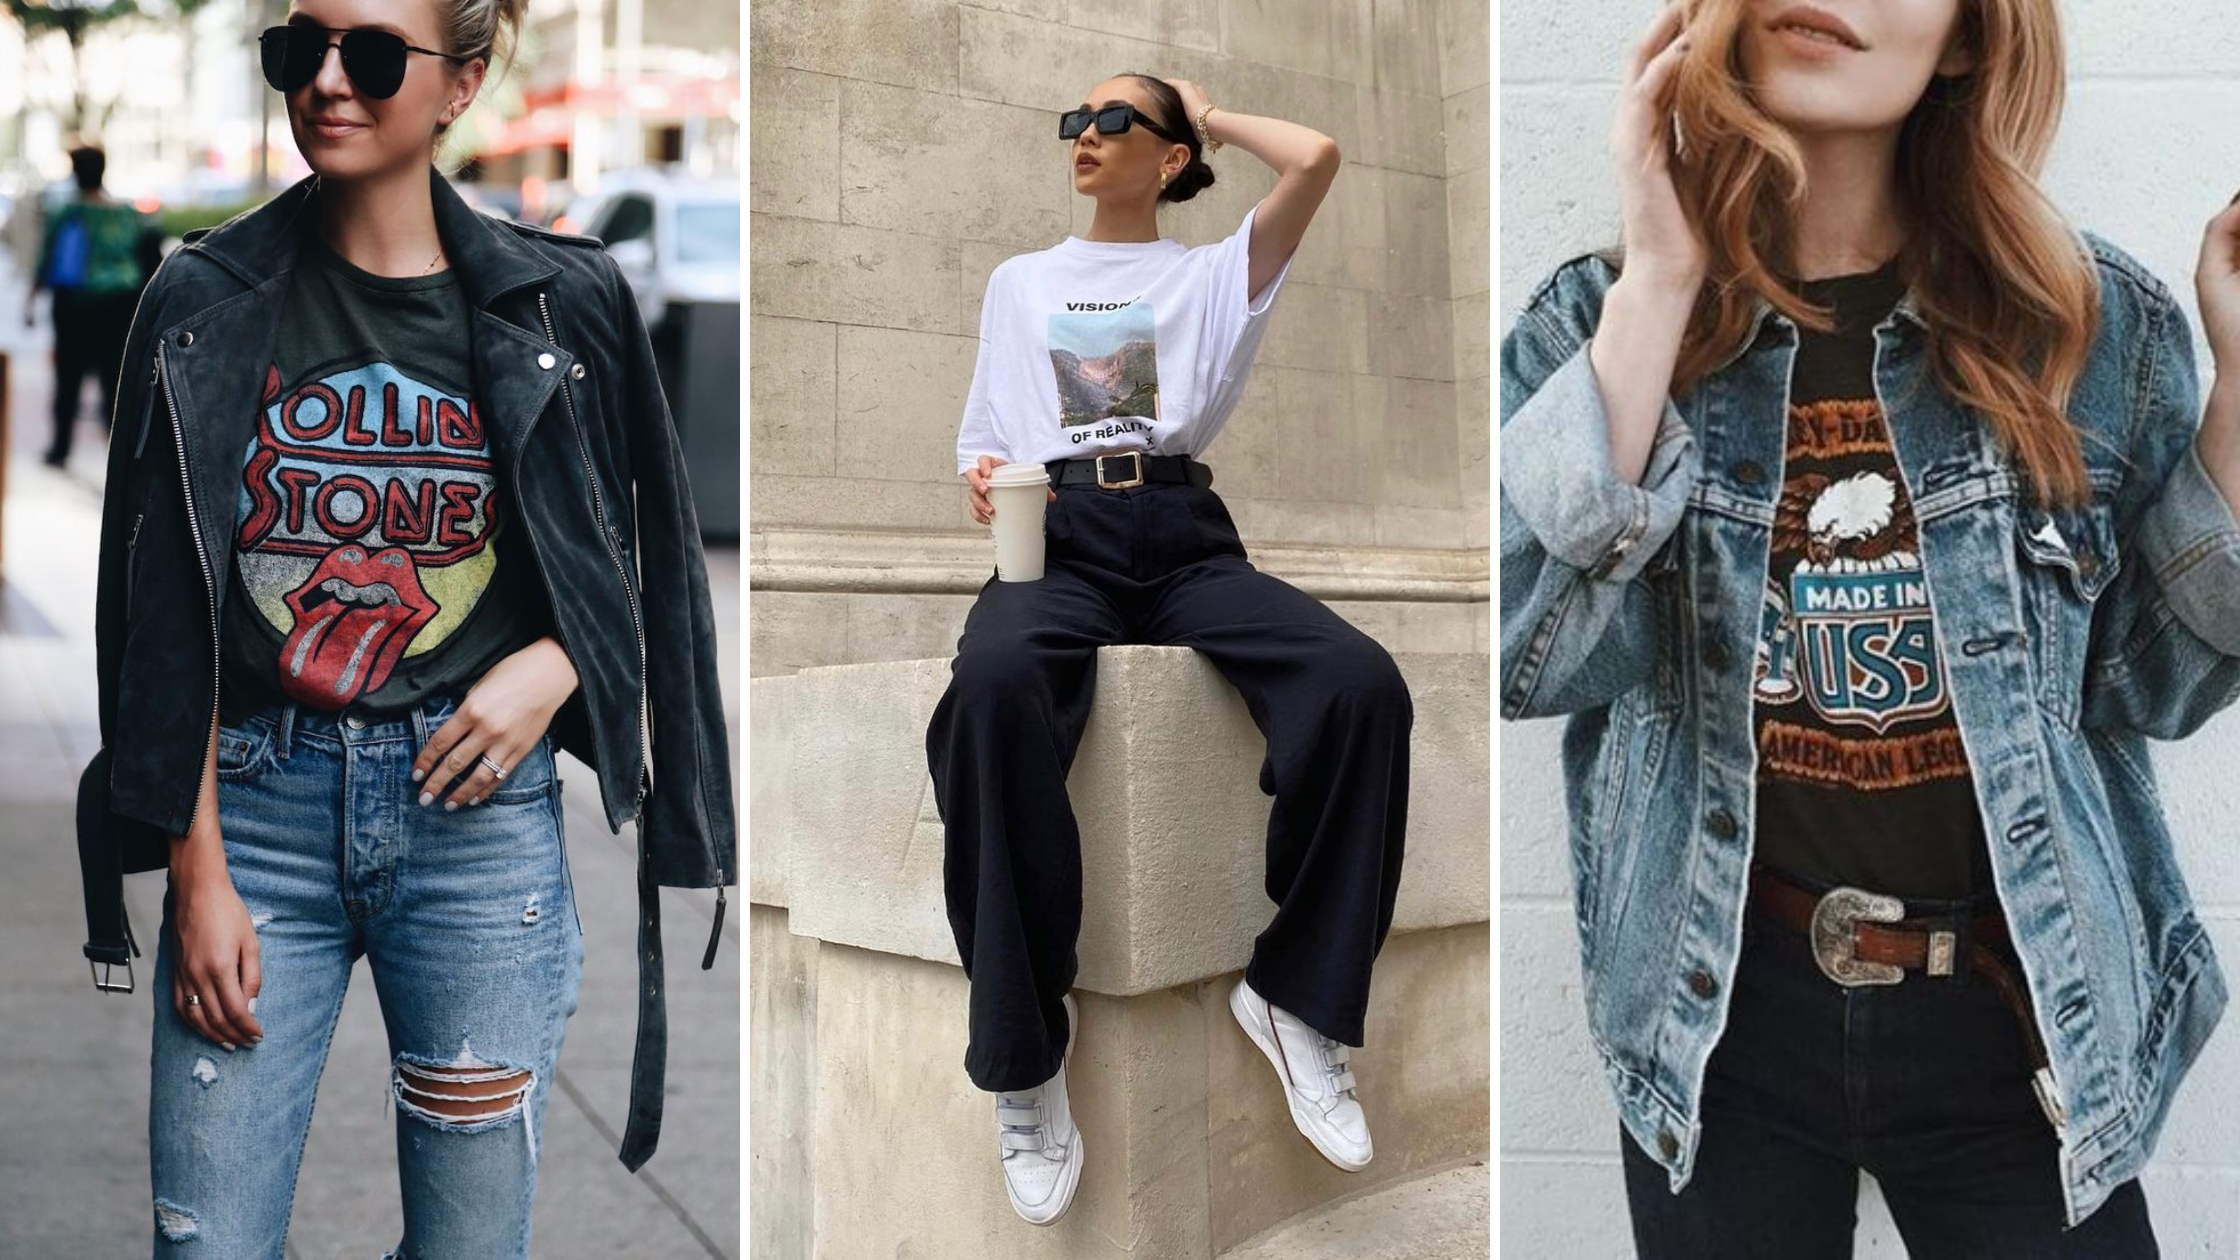 Vibrant & Versatile Outfit Ideas: 9 Creative Ways to Wear Your Graphic Tee